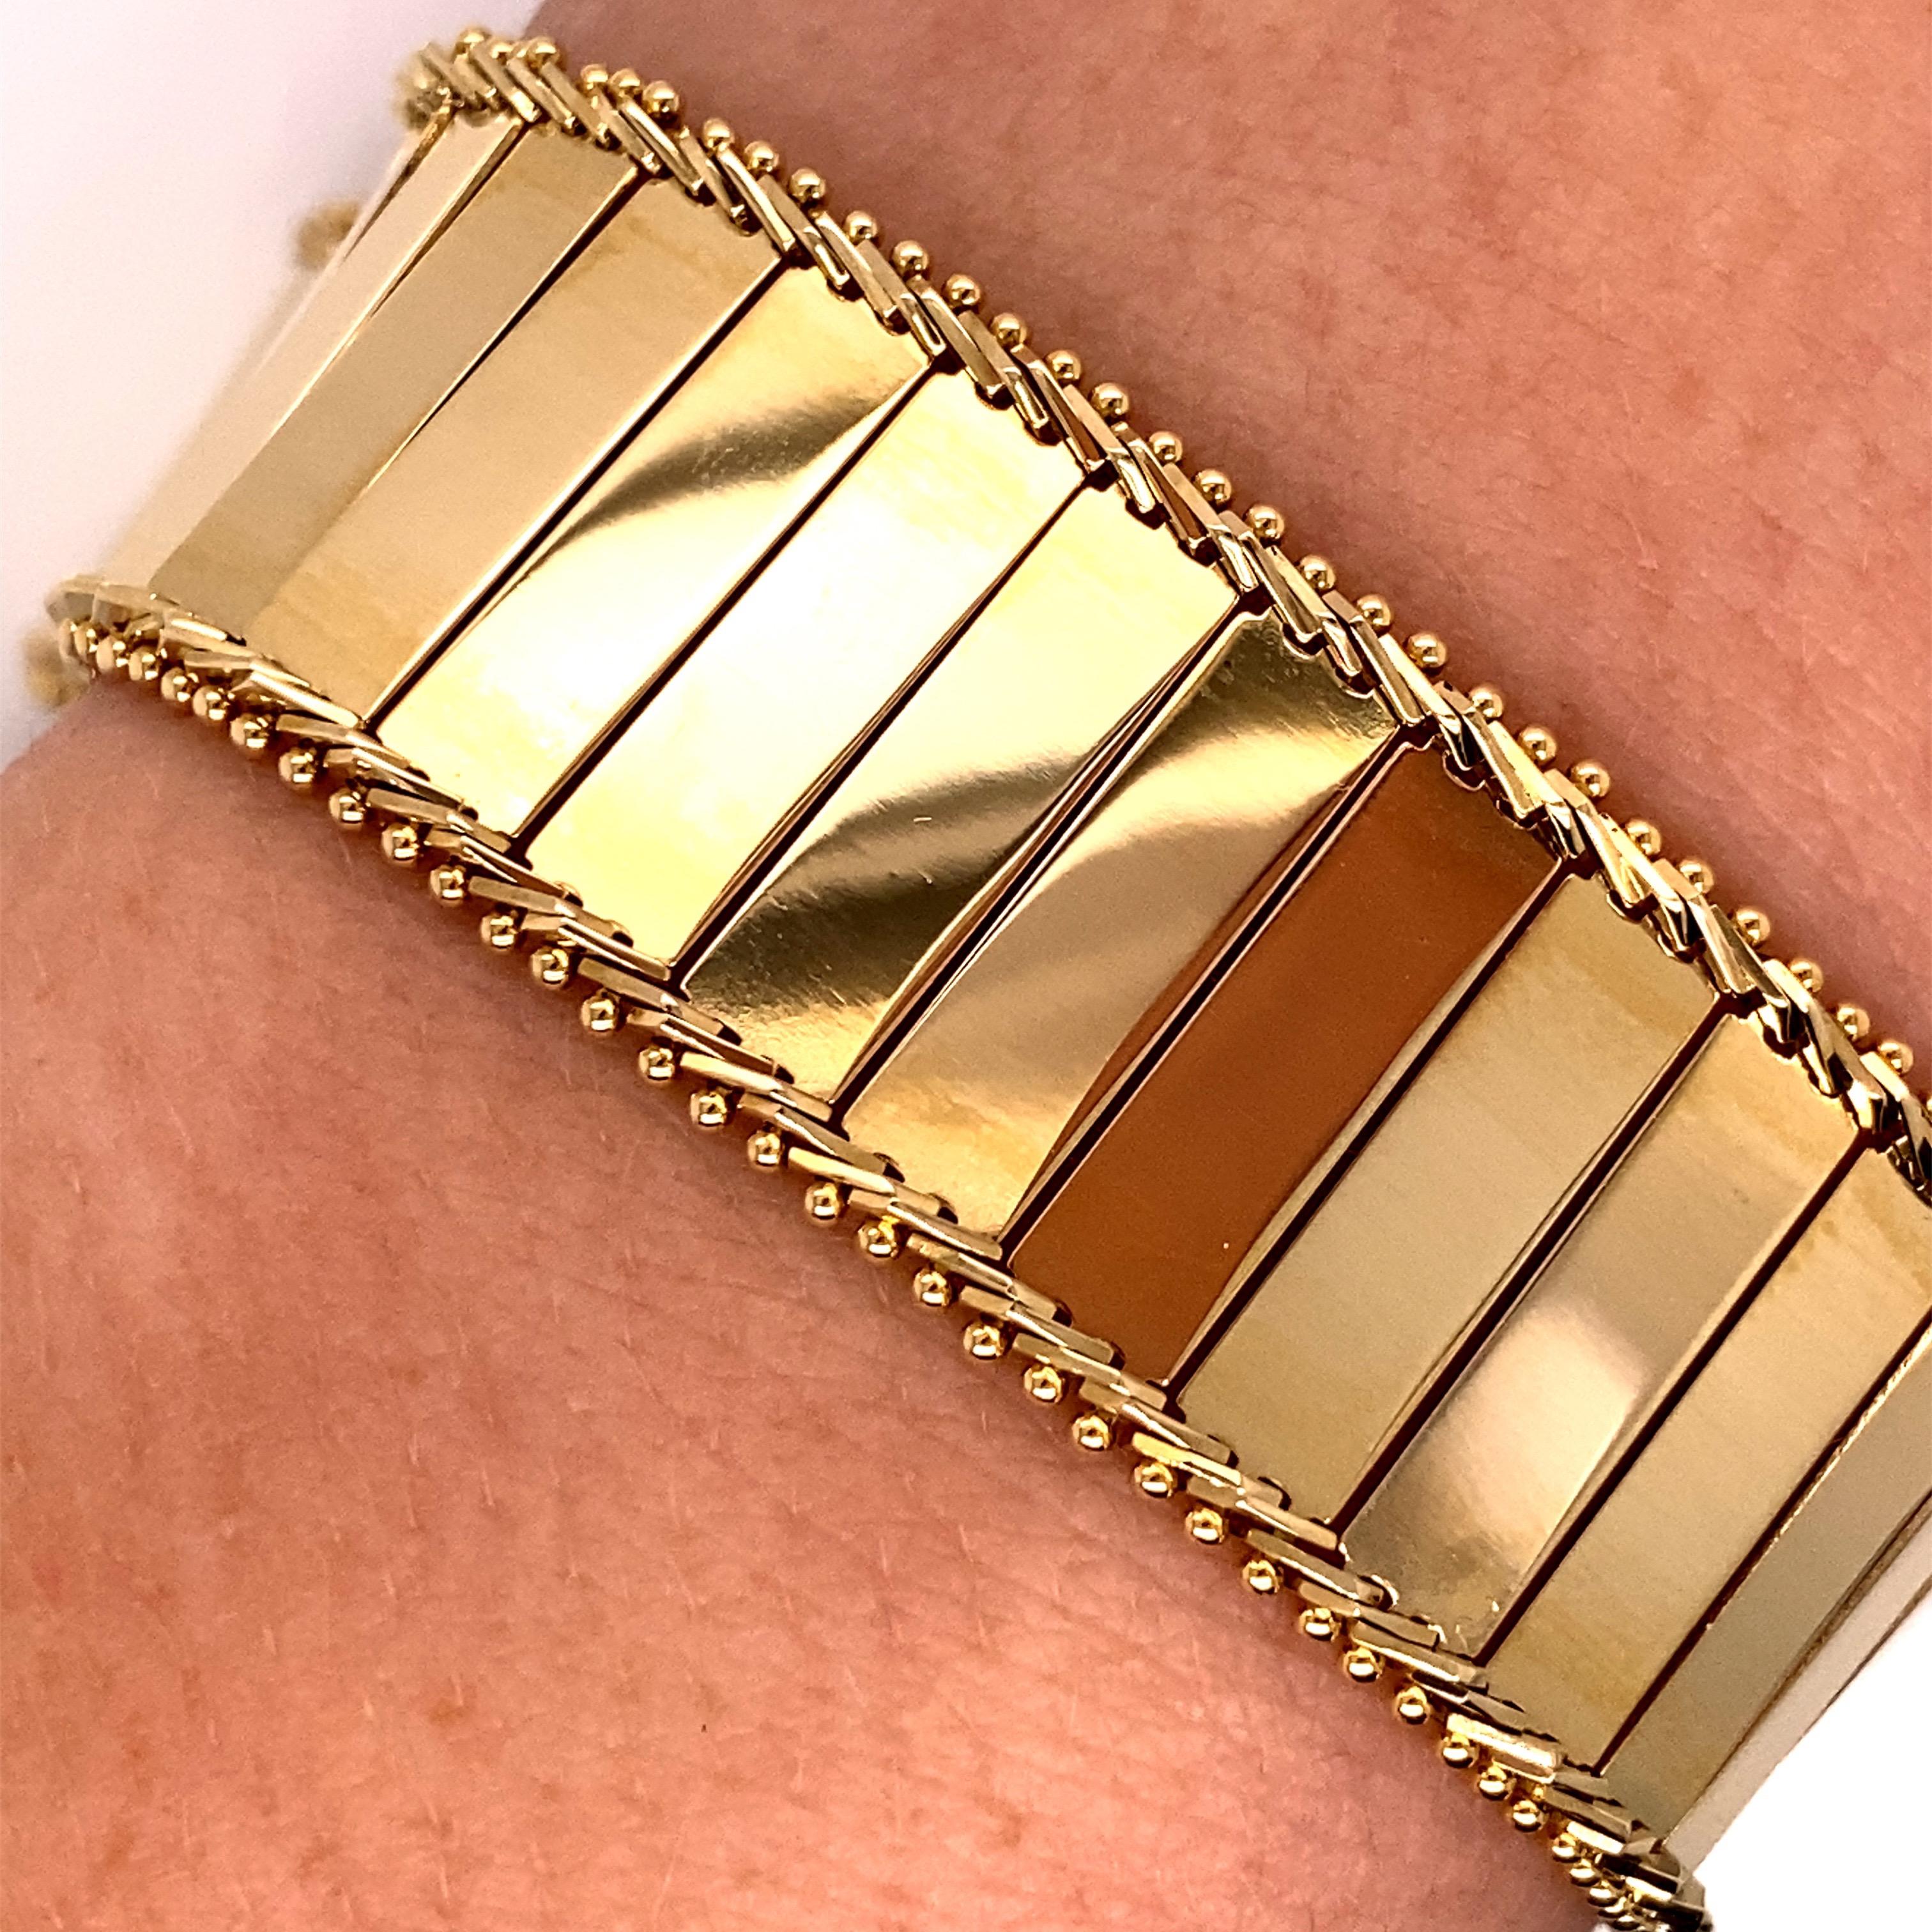 Vintage 1980s 14 Karat Yellow Gold Wide Mirror Finish Link Bracelet In Good Condition For Sale In Boston, MA